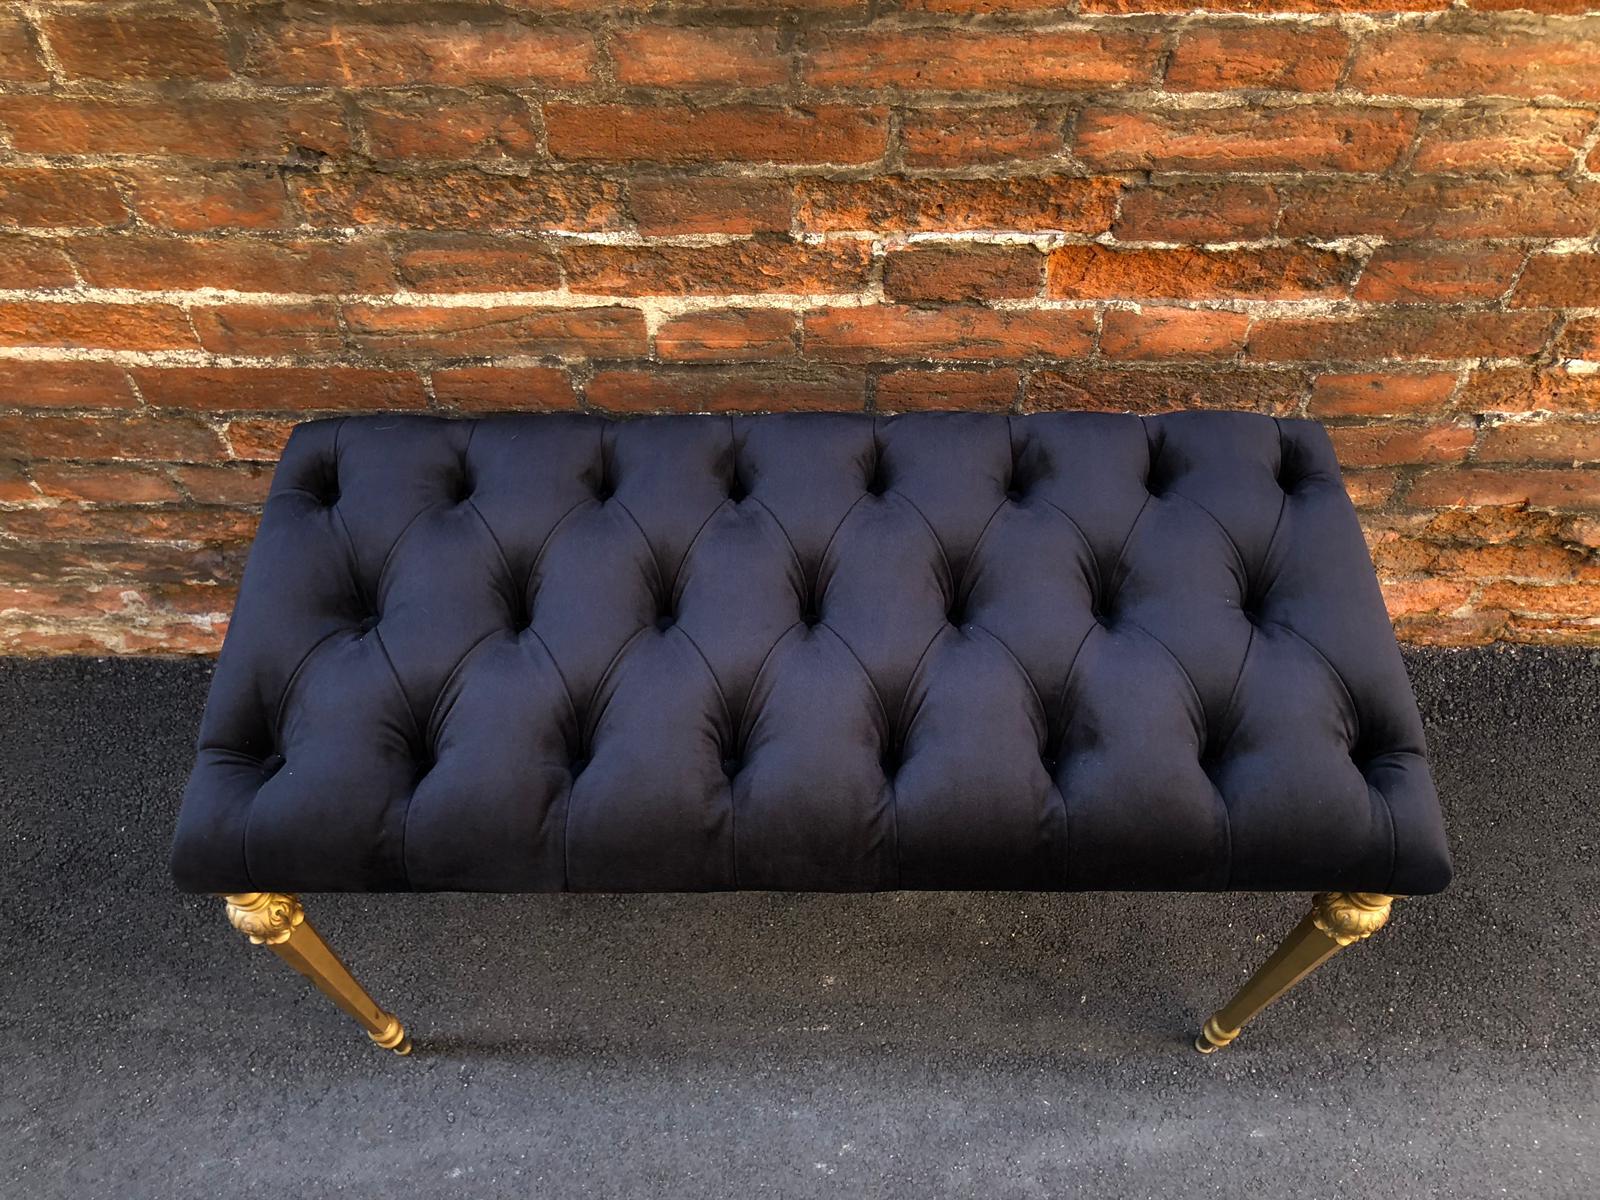 20th Century French Louis XVI Style Black Leather Brass Legs Bench from 1940s